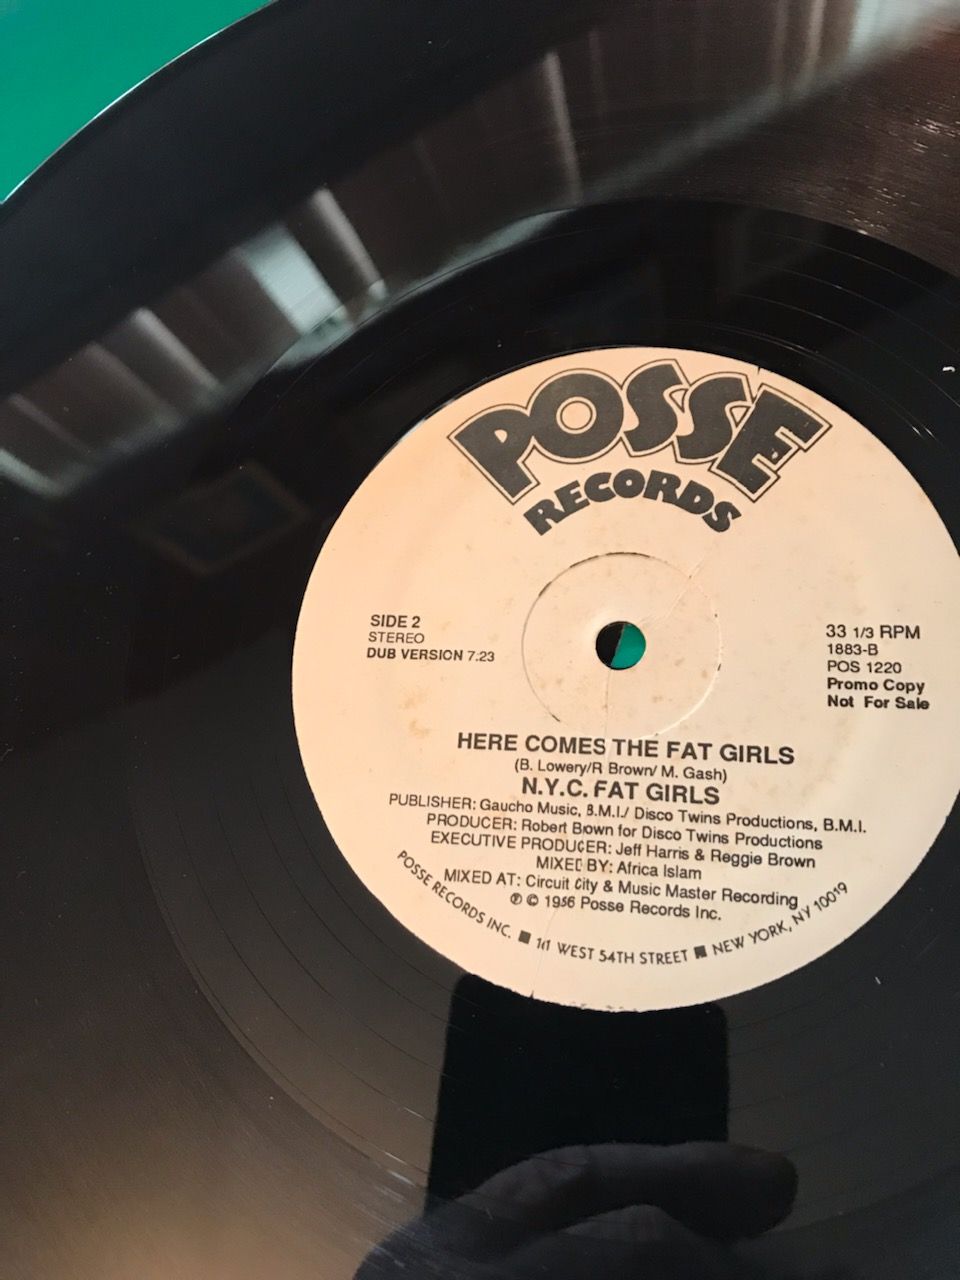 N.Y.C. Fat Girls - Here Comes The Fat Girls - Posse Rec... 3